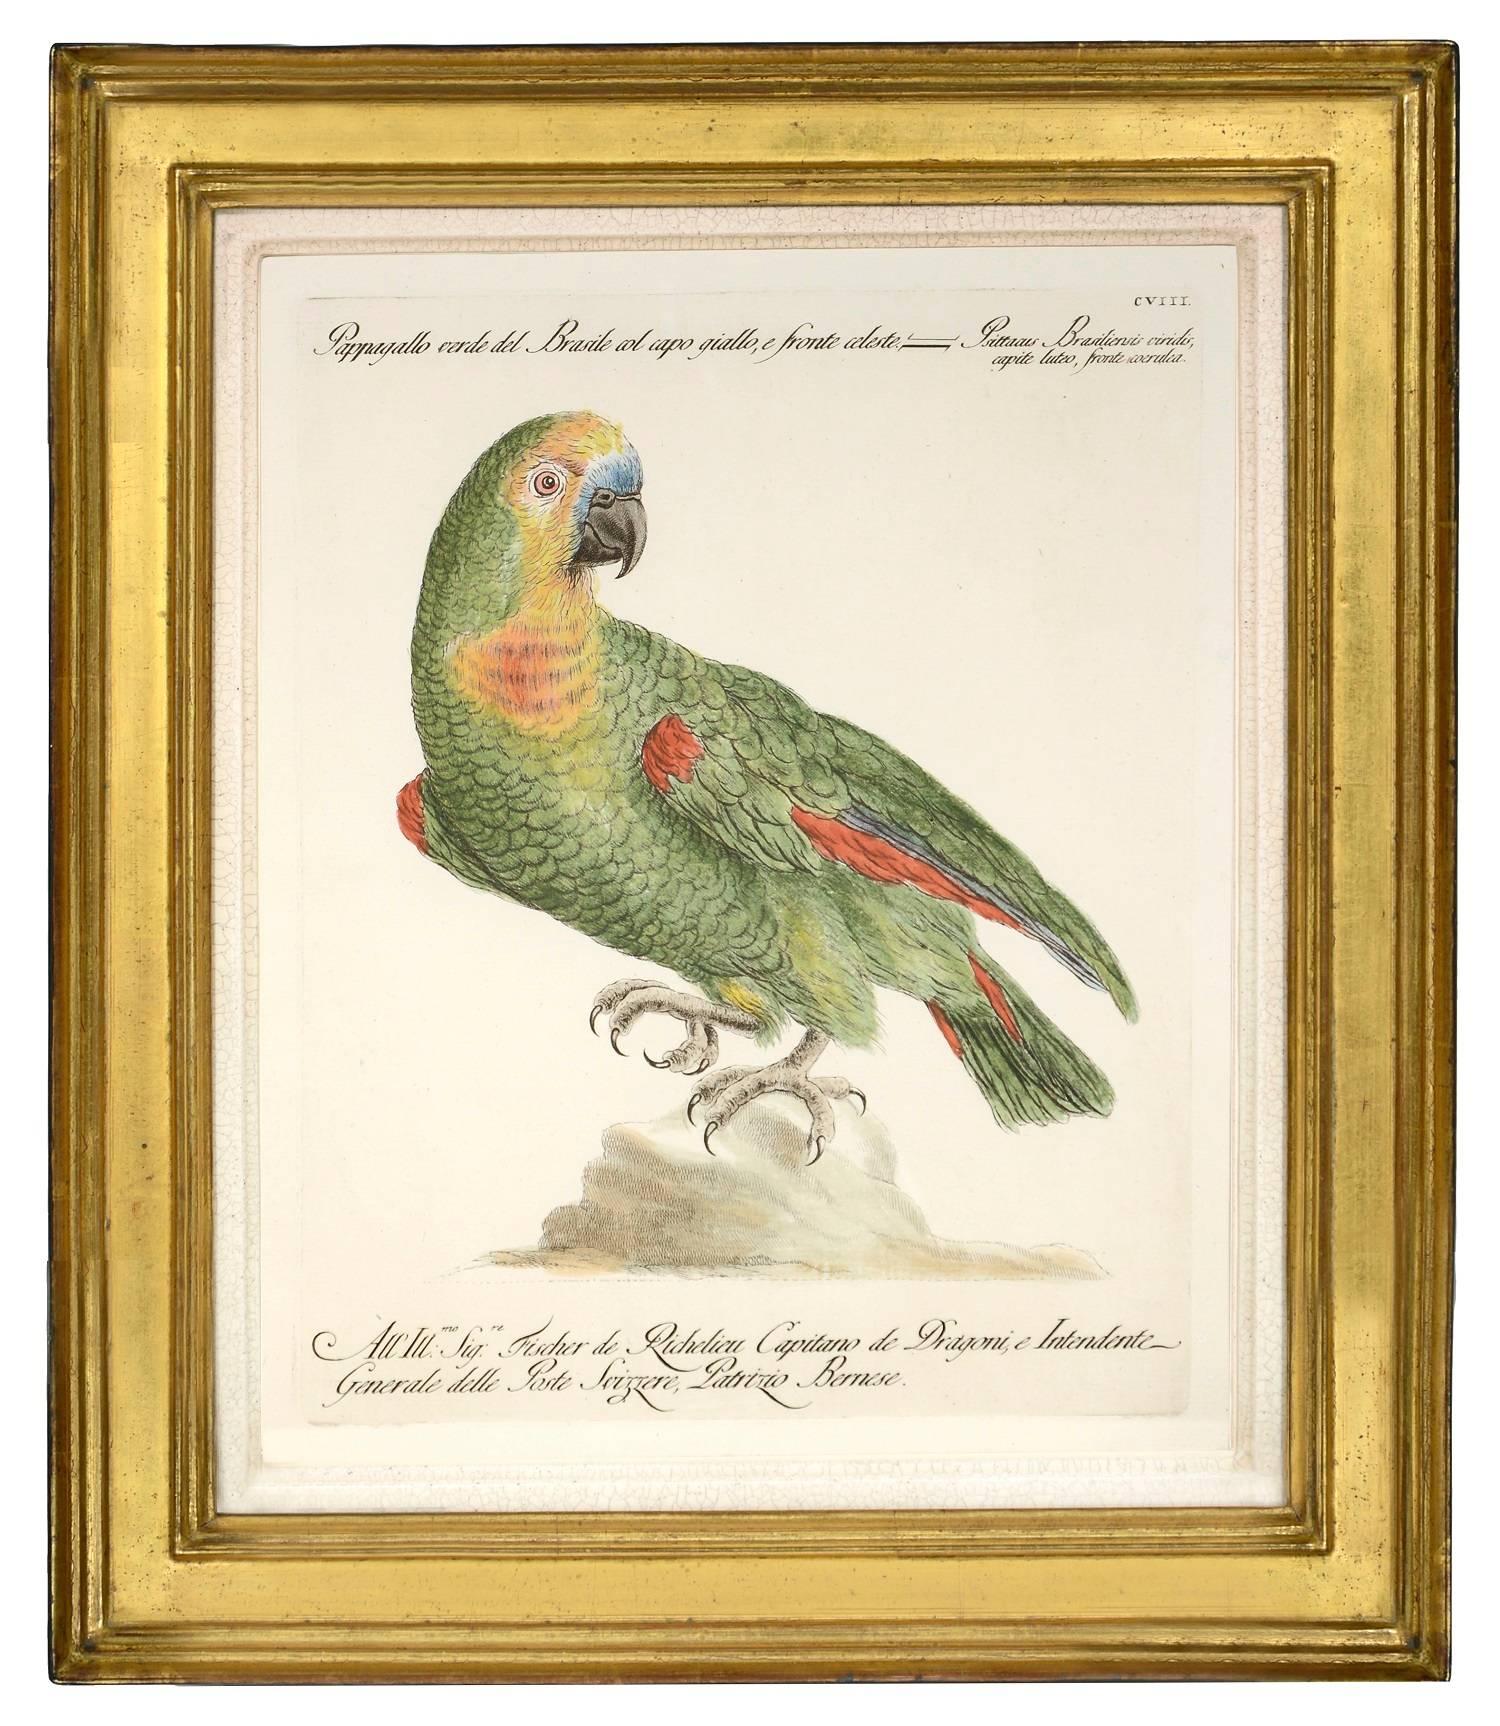 Hand-coloured etchings, with engraving. Original colour. Very good condition with strong, fresh colour and full margins.  Framed and glazed, overall dimensions: 41.5cm by 49.5cm.
Storia naturale degli uccelli... was one of the finest bird books